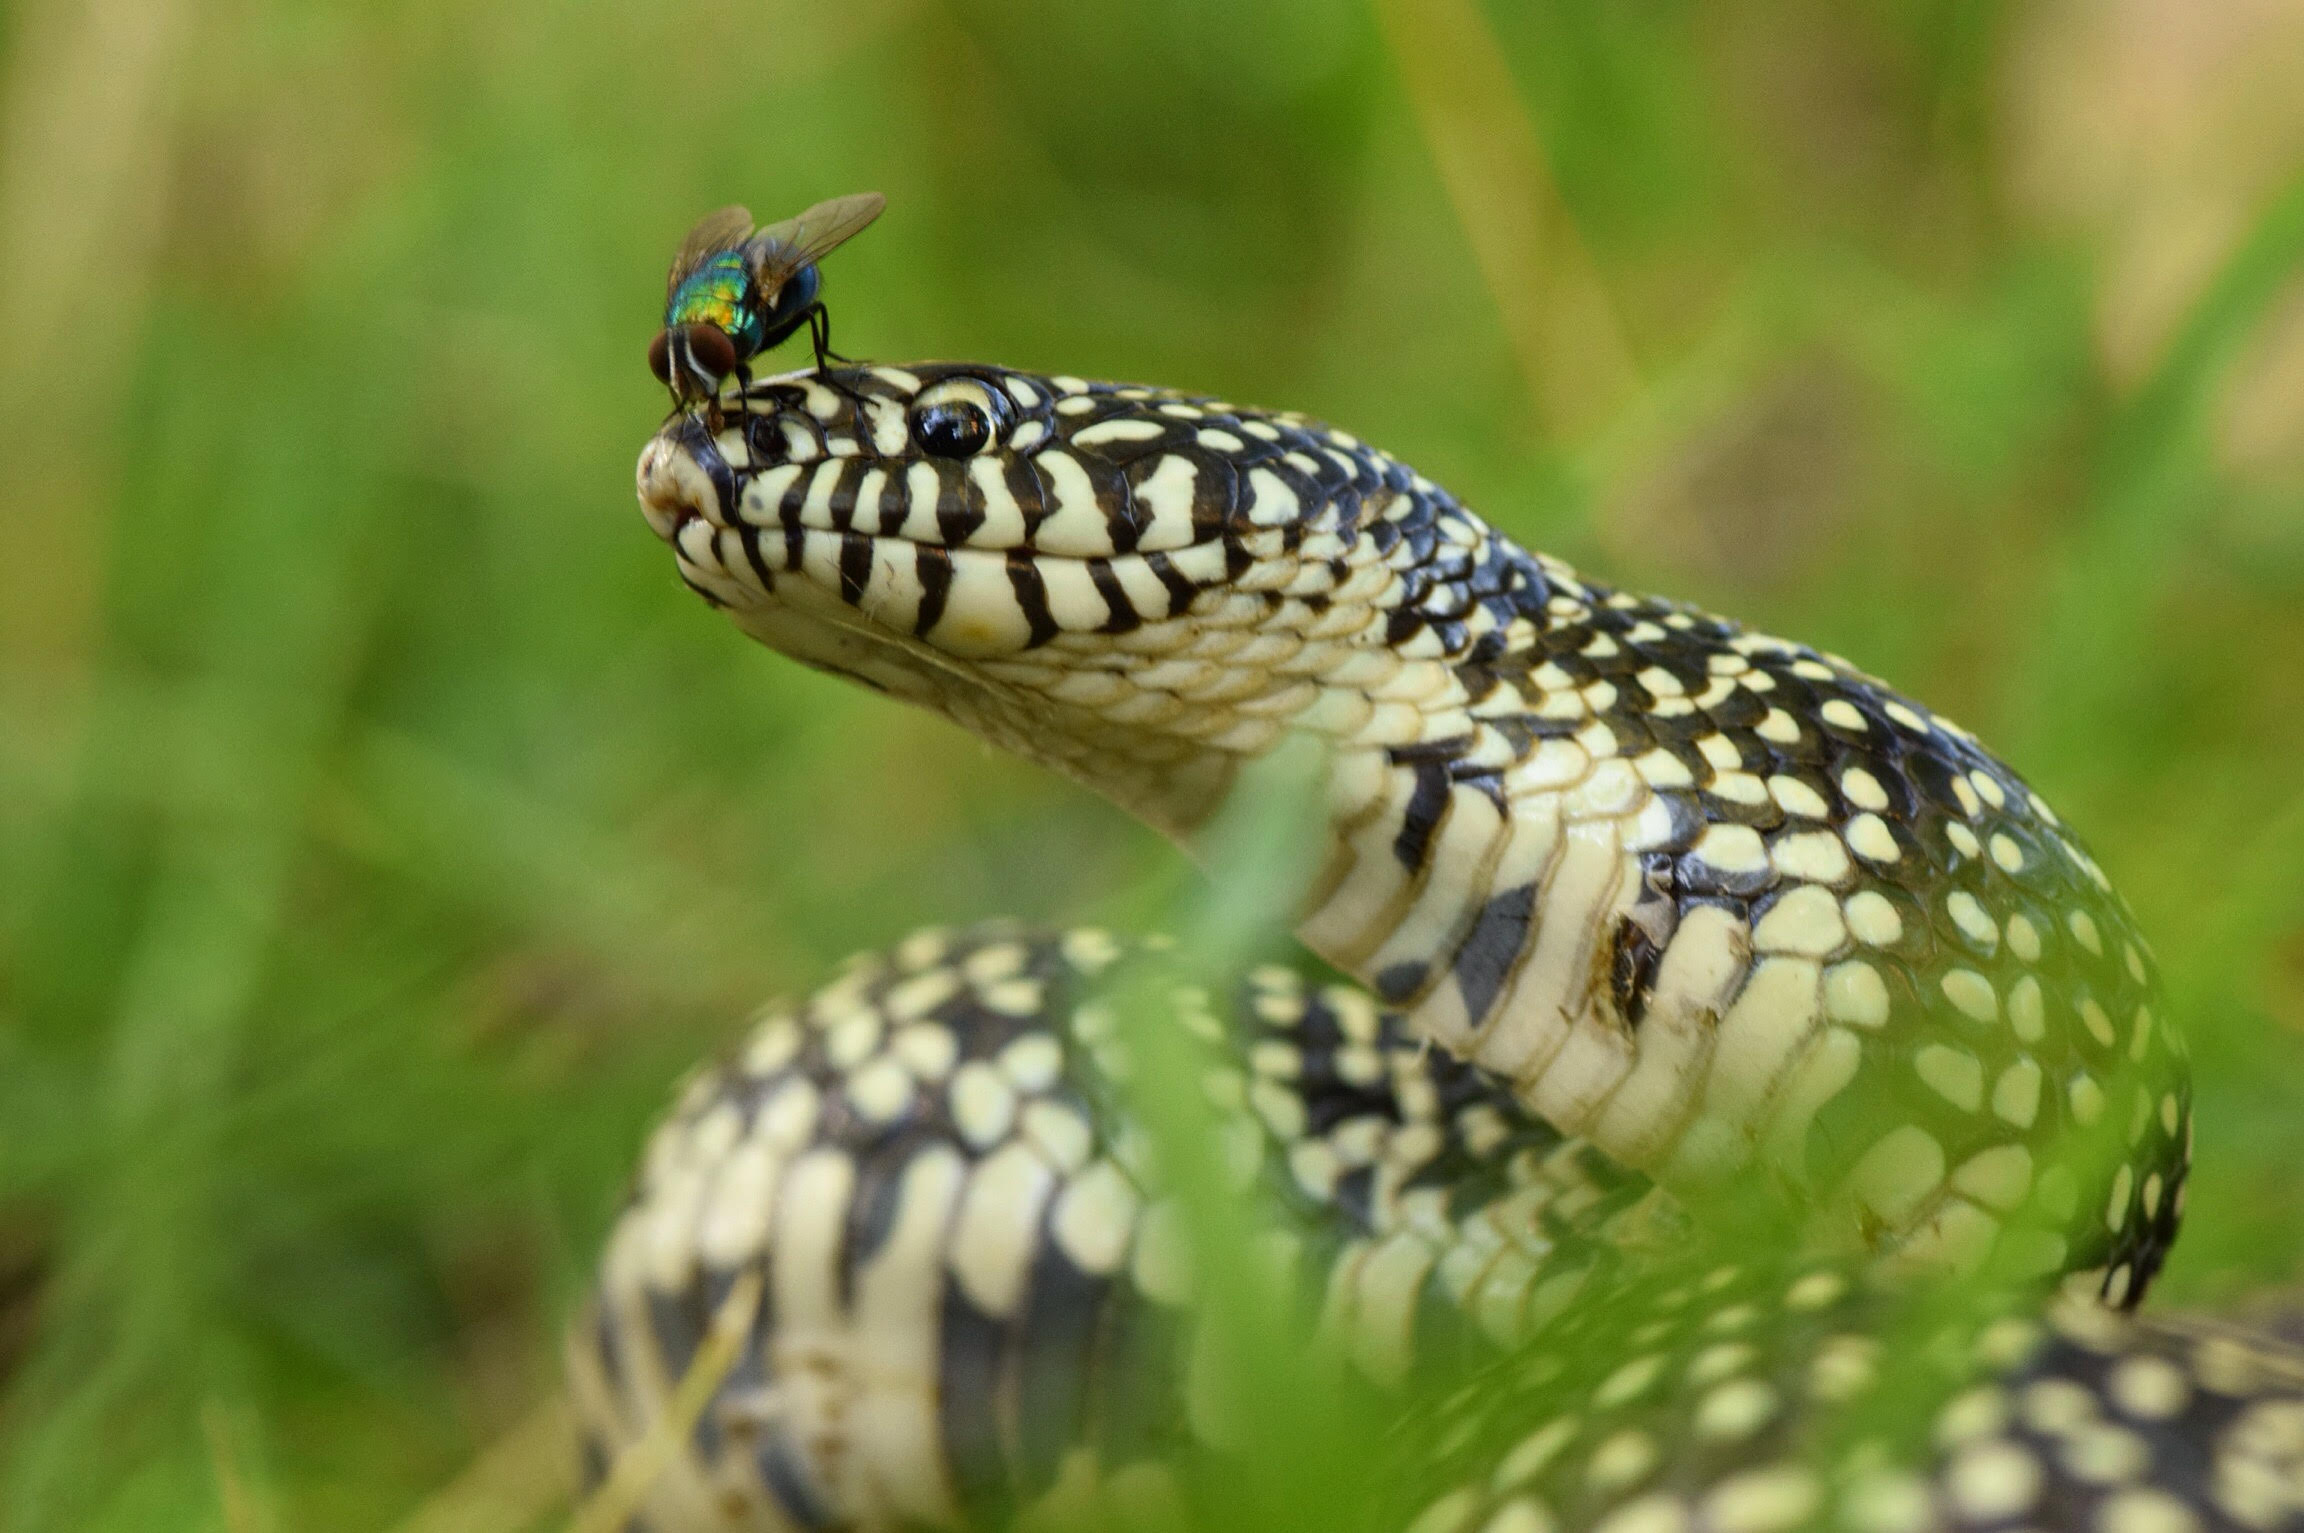 Speckled Kingsnake photo by Justin Sokol